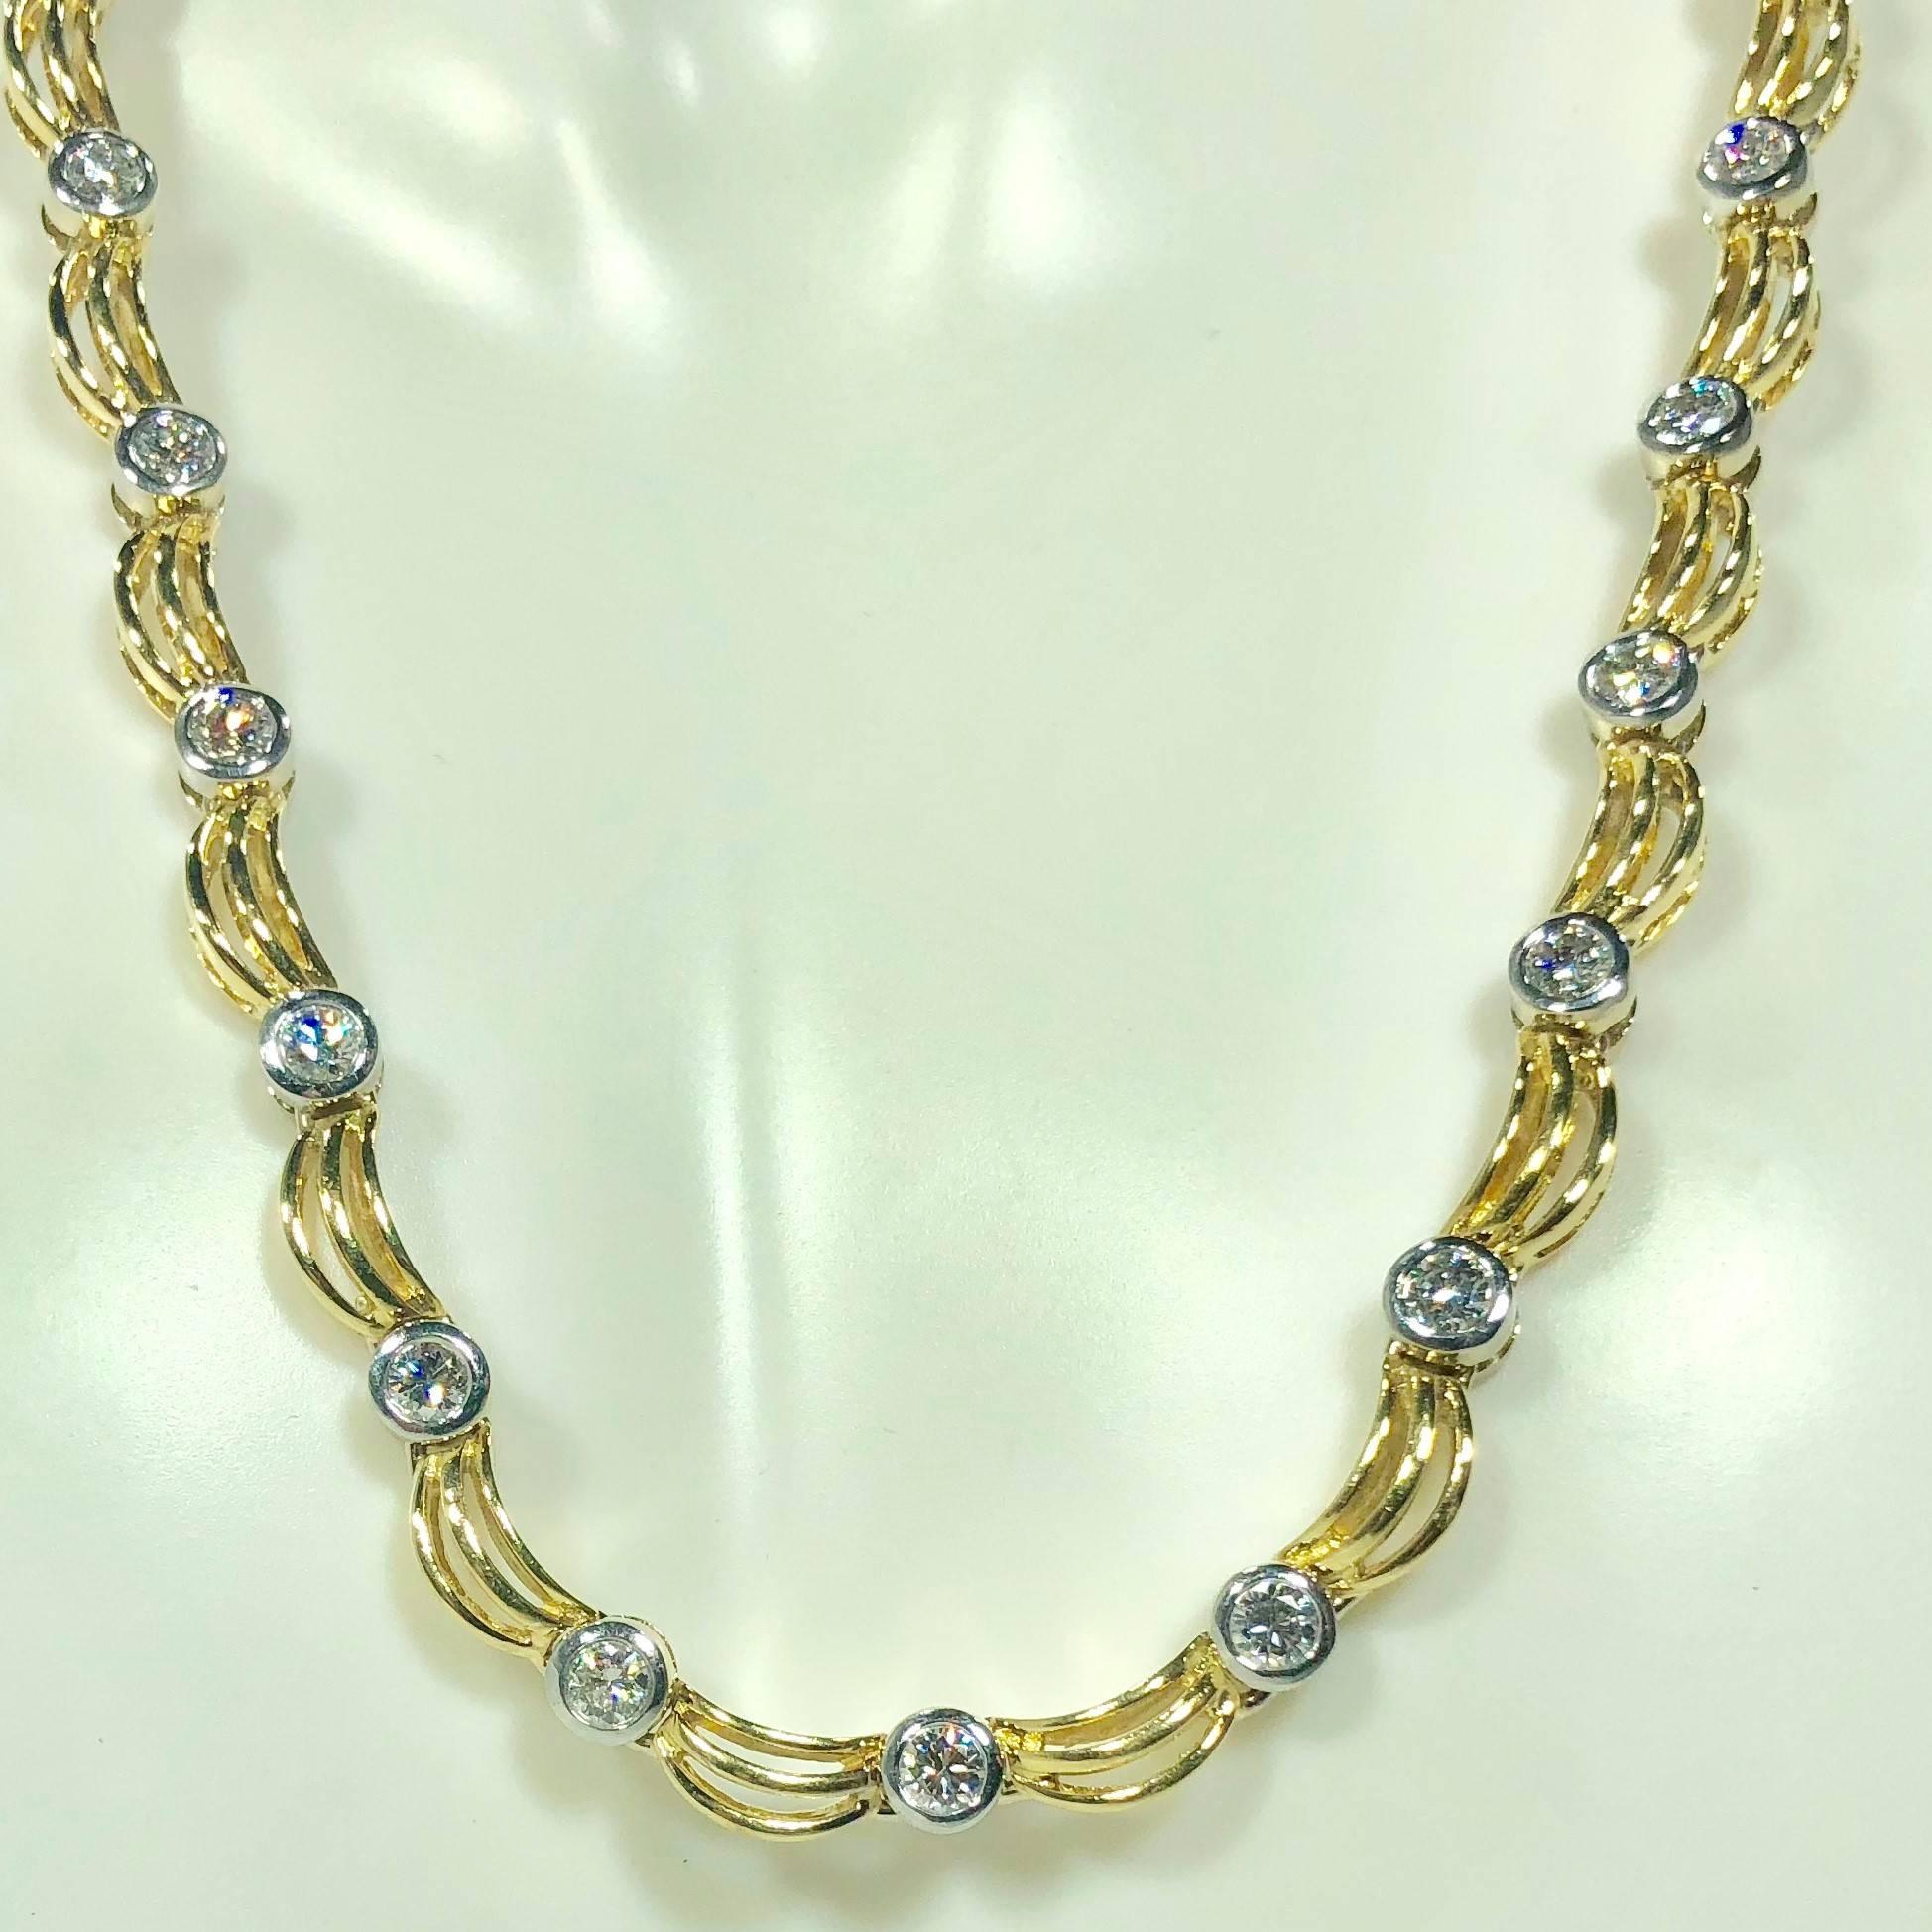 18 karat 2 tone white/yellow gold and 1.0 carat diamond fancy link necklace. This substantial 18 karat yellow and white gold two toned creation weighs 40.7 grams, 26.2 dwt.. The fancy link style and design of this piece  incorporates circular